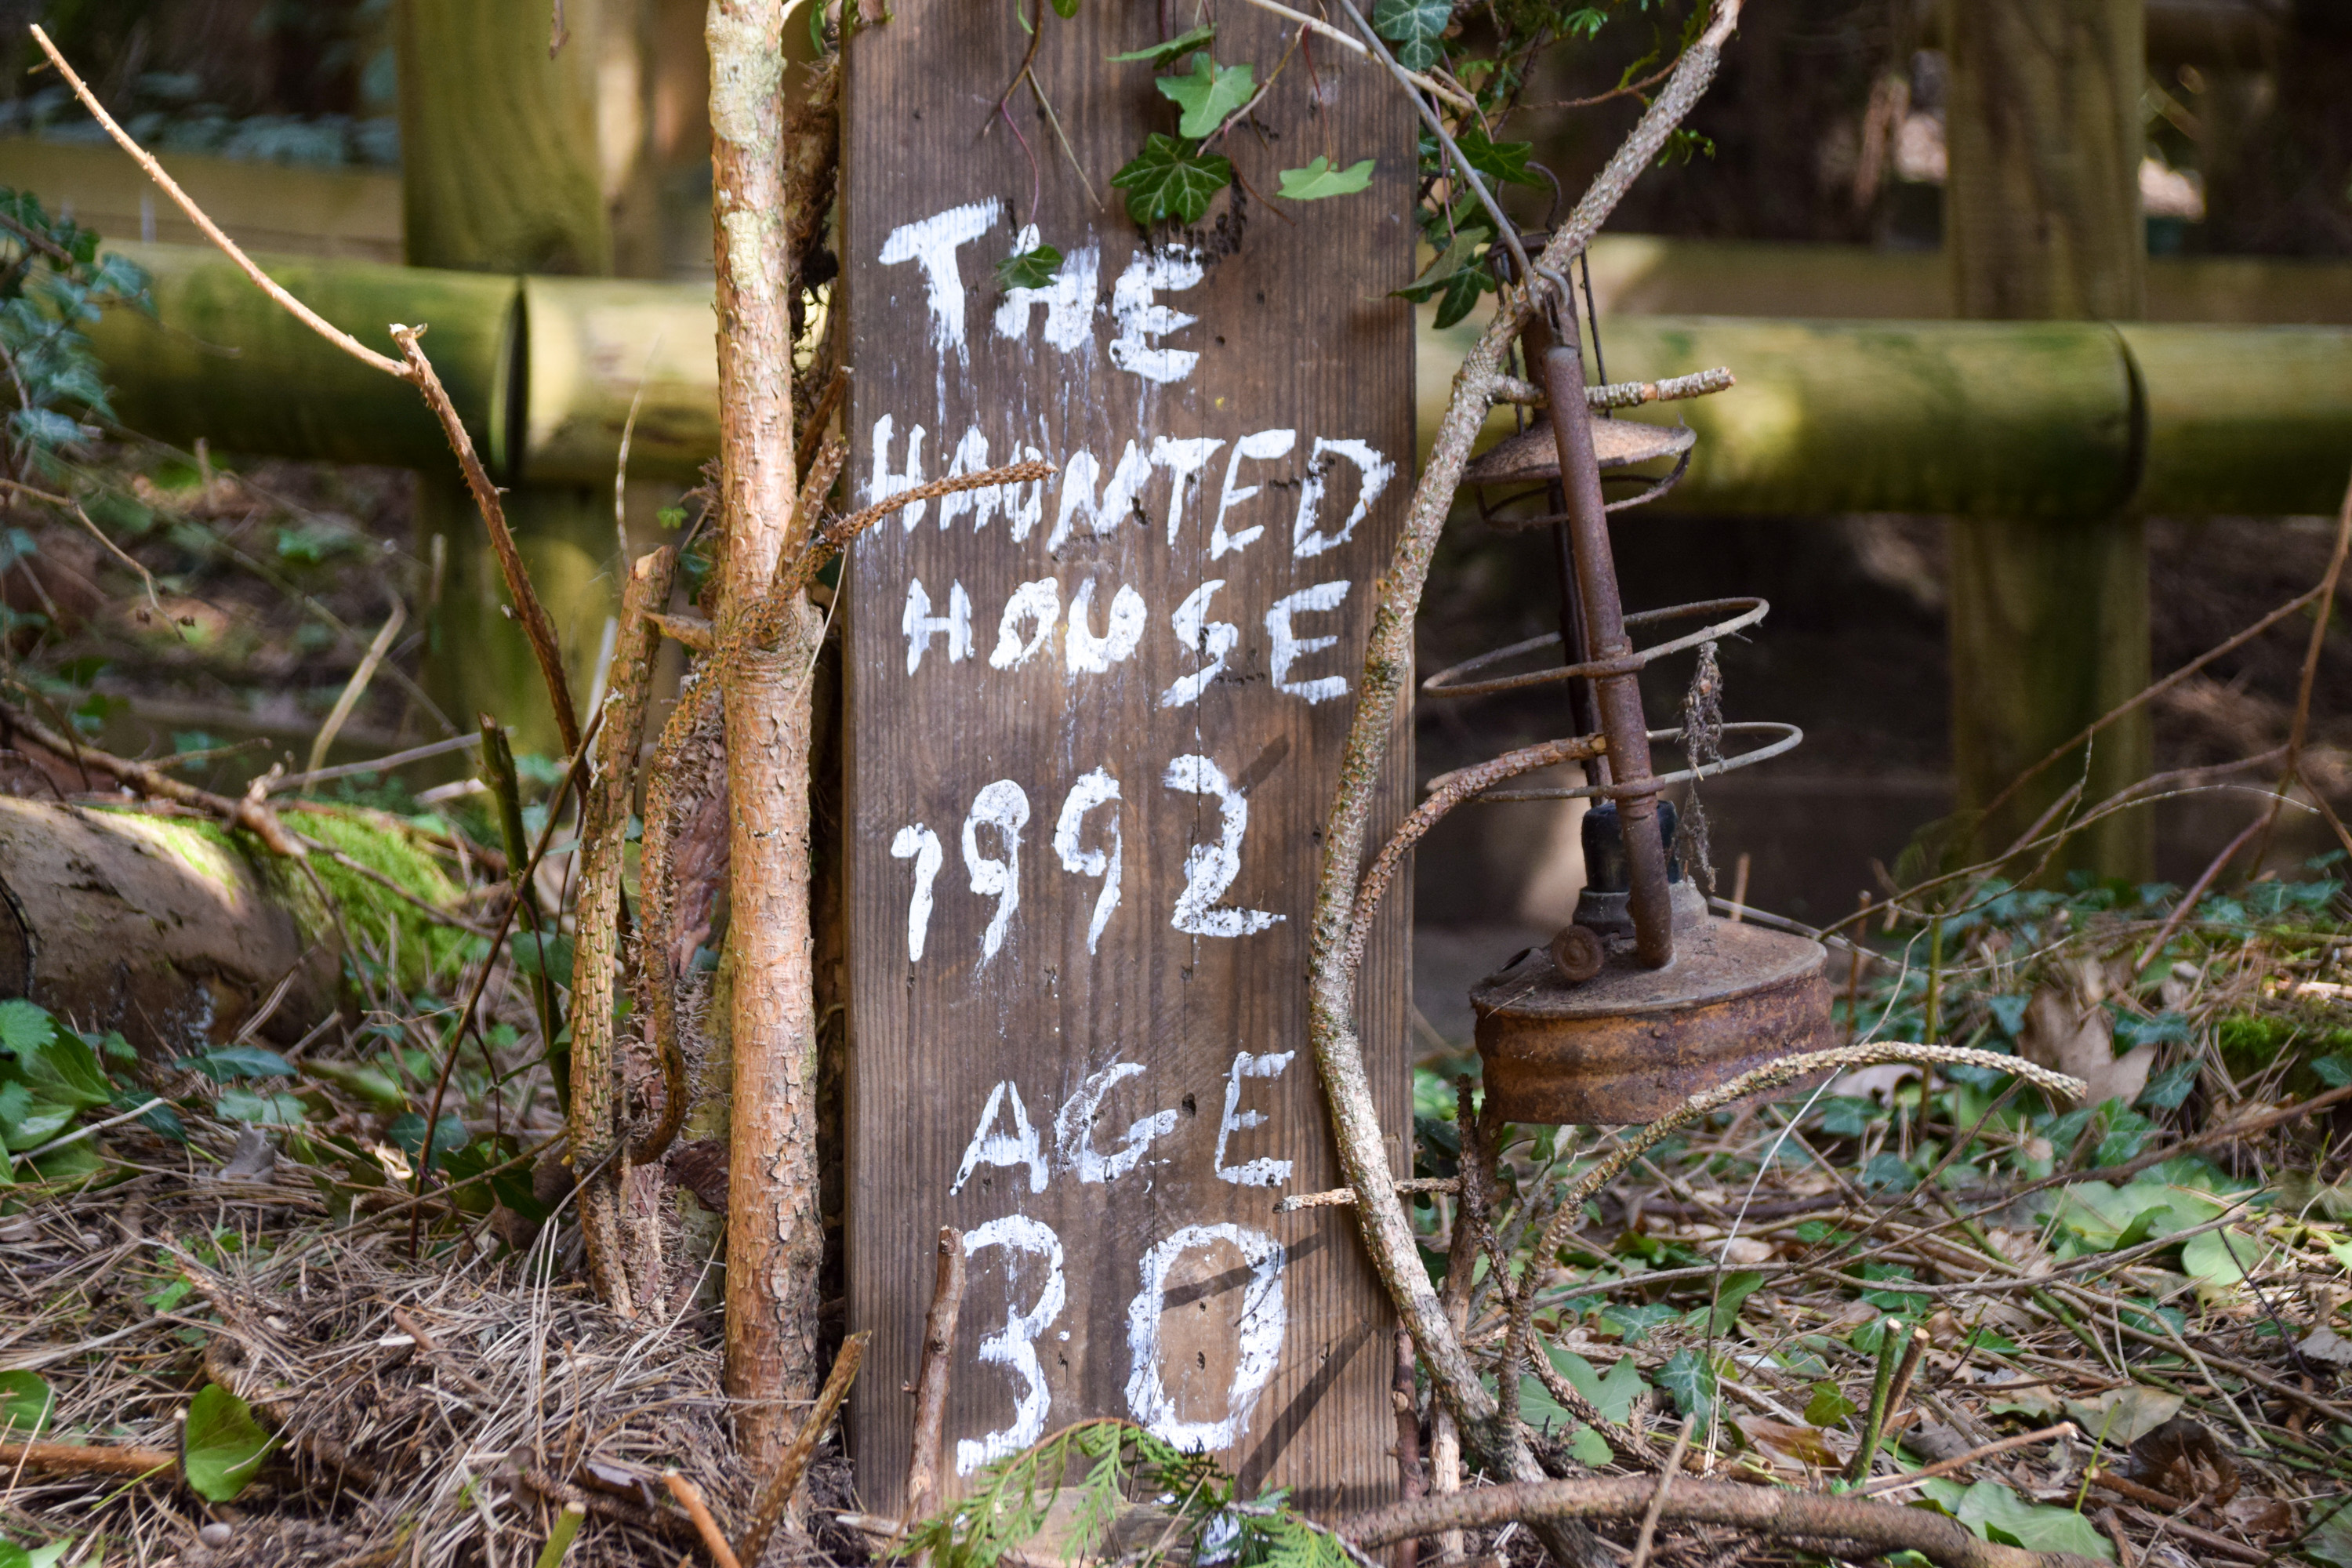 Alton Towers Haunted House Turns 30